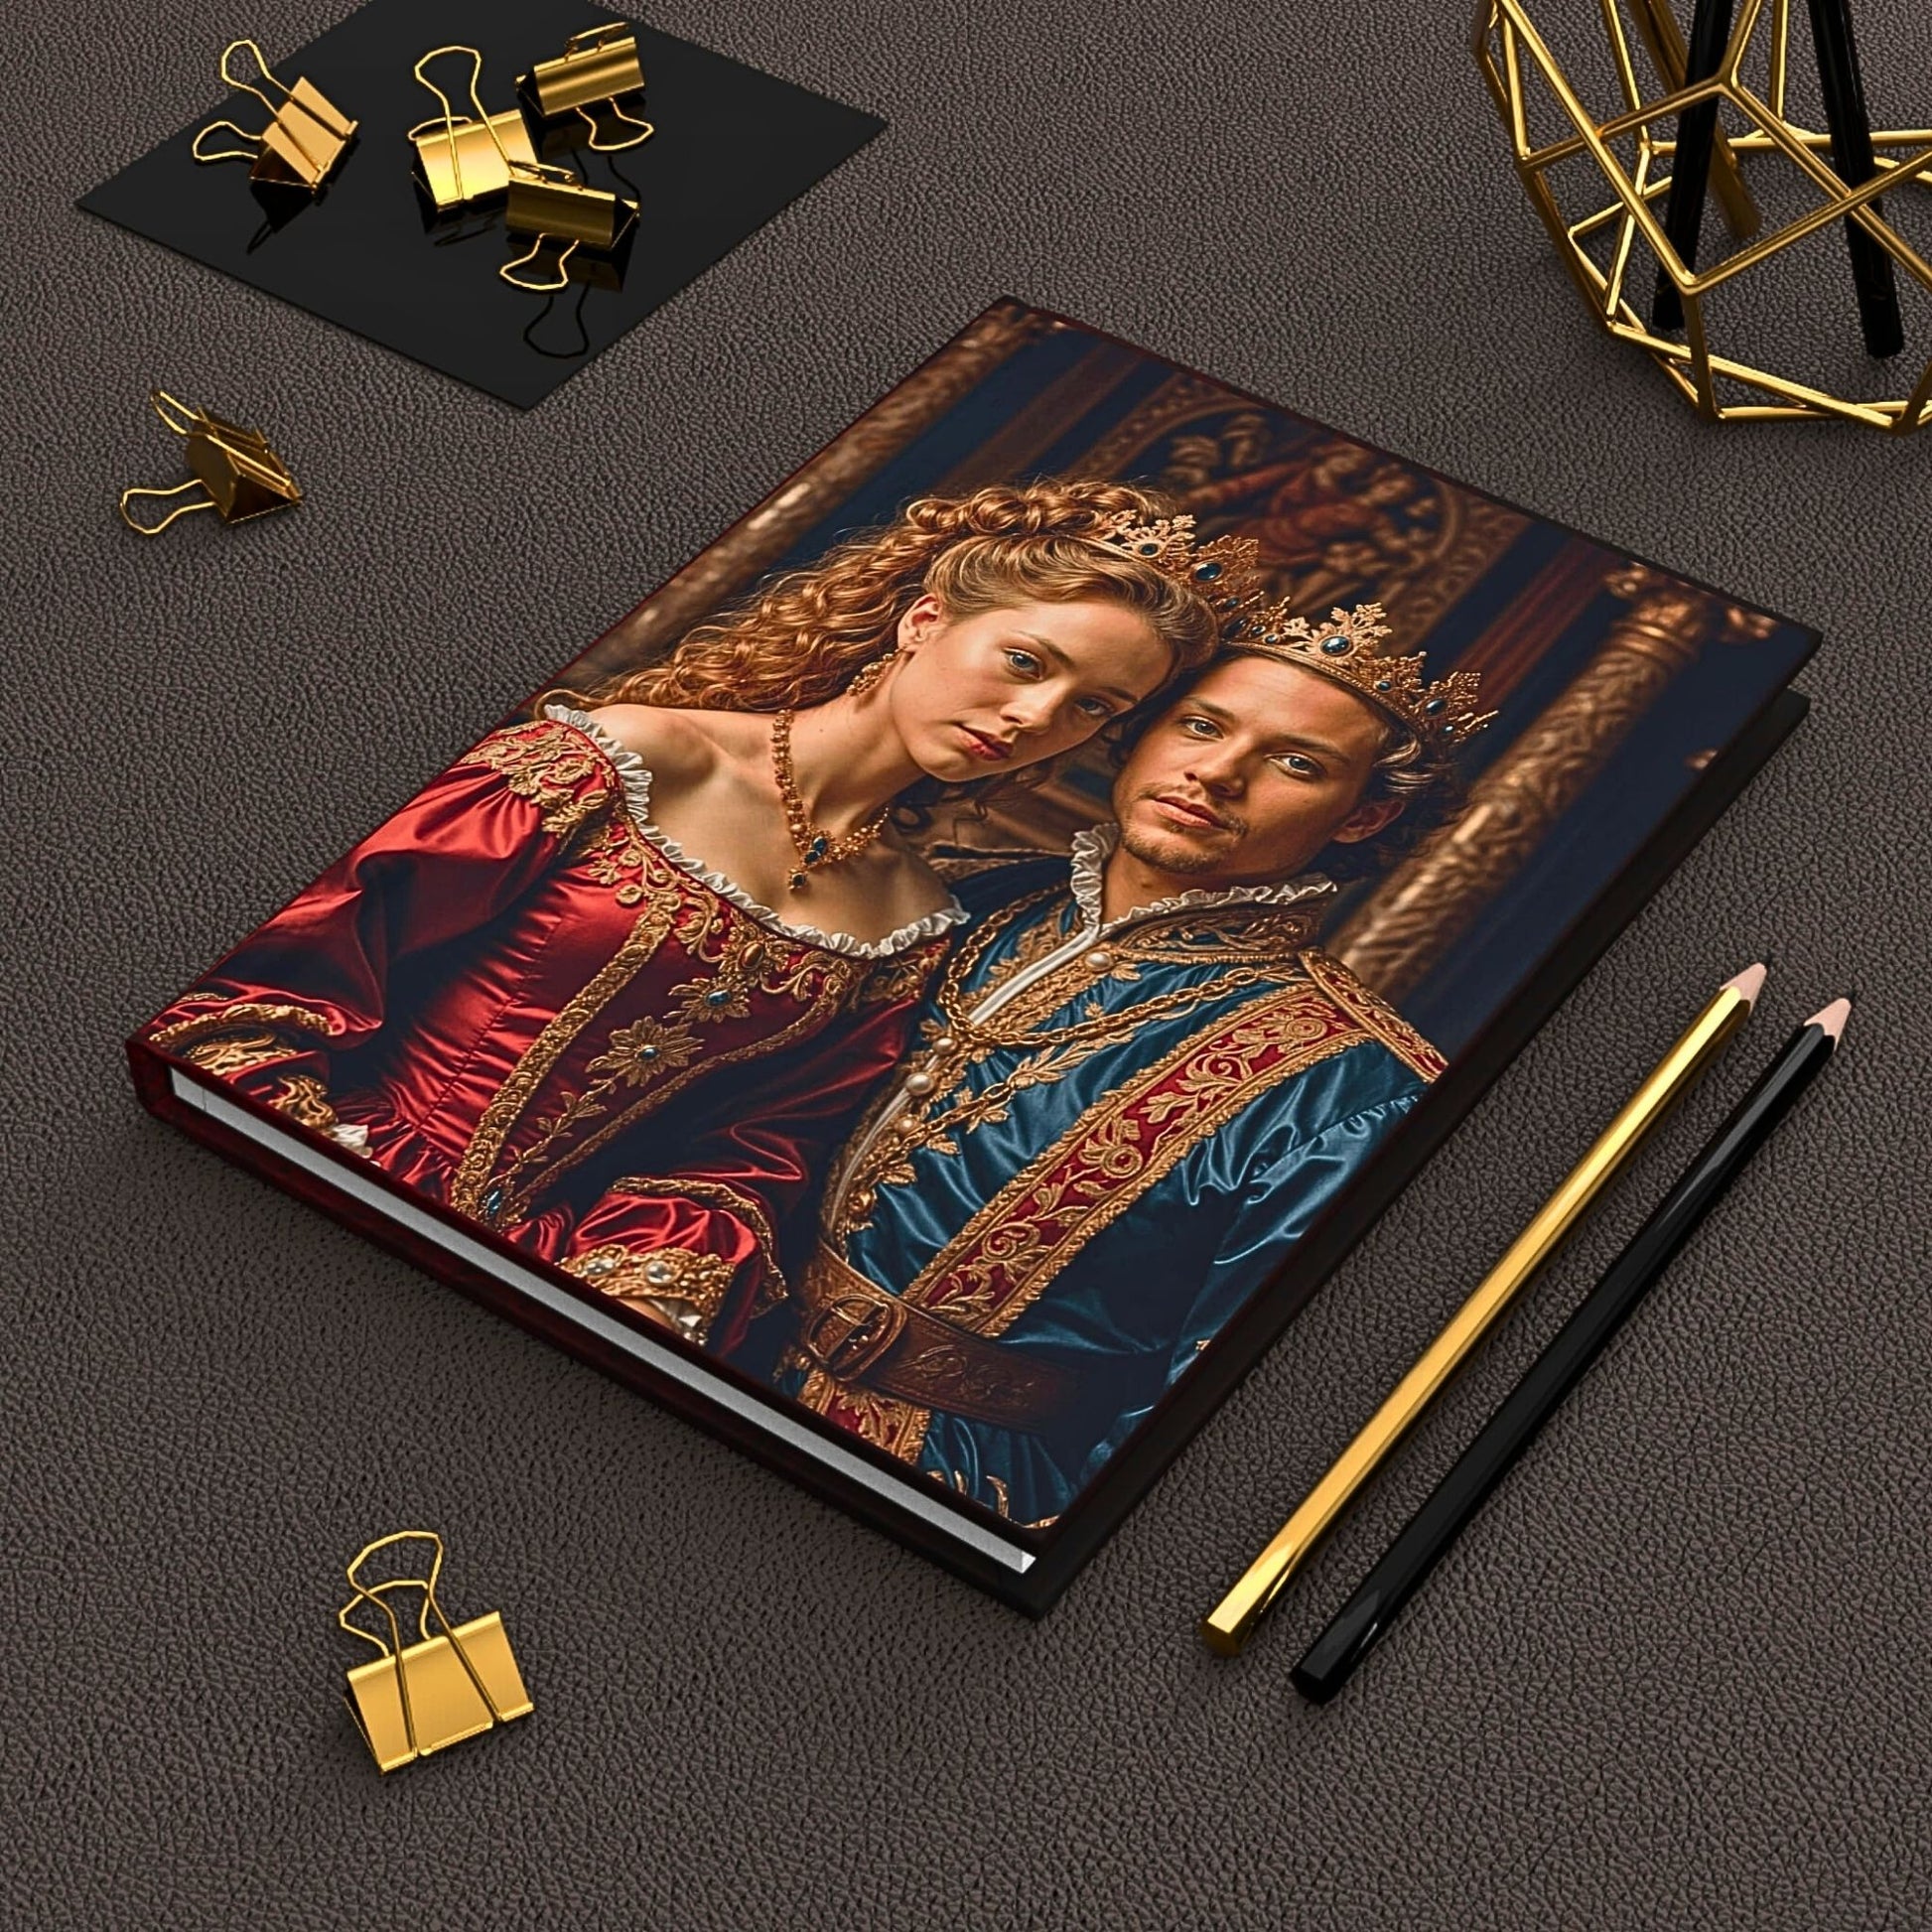 Elevate your gifting with our Royal Couple Journal, an exquisite blend of personalization and elegance. Ideal for birthdays, anniversaries, or as a heartfelt Father's Day gift, customize your journal with photos for a truly regal touch. Discover the perfect tribute to your loved one with our Royal Journal Collection today!